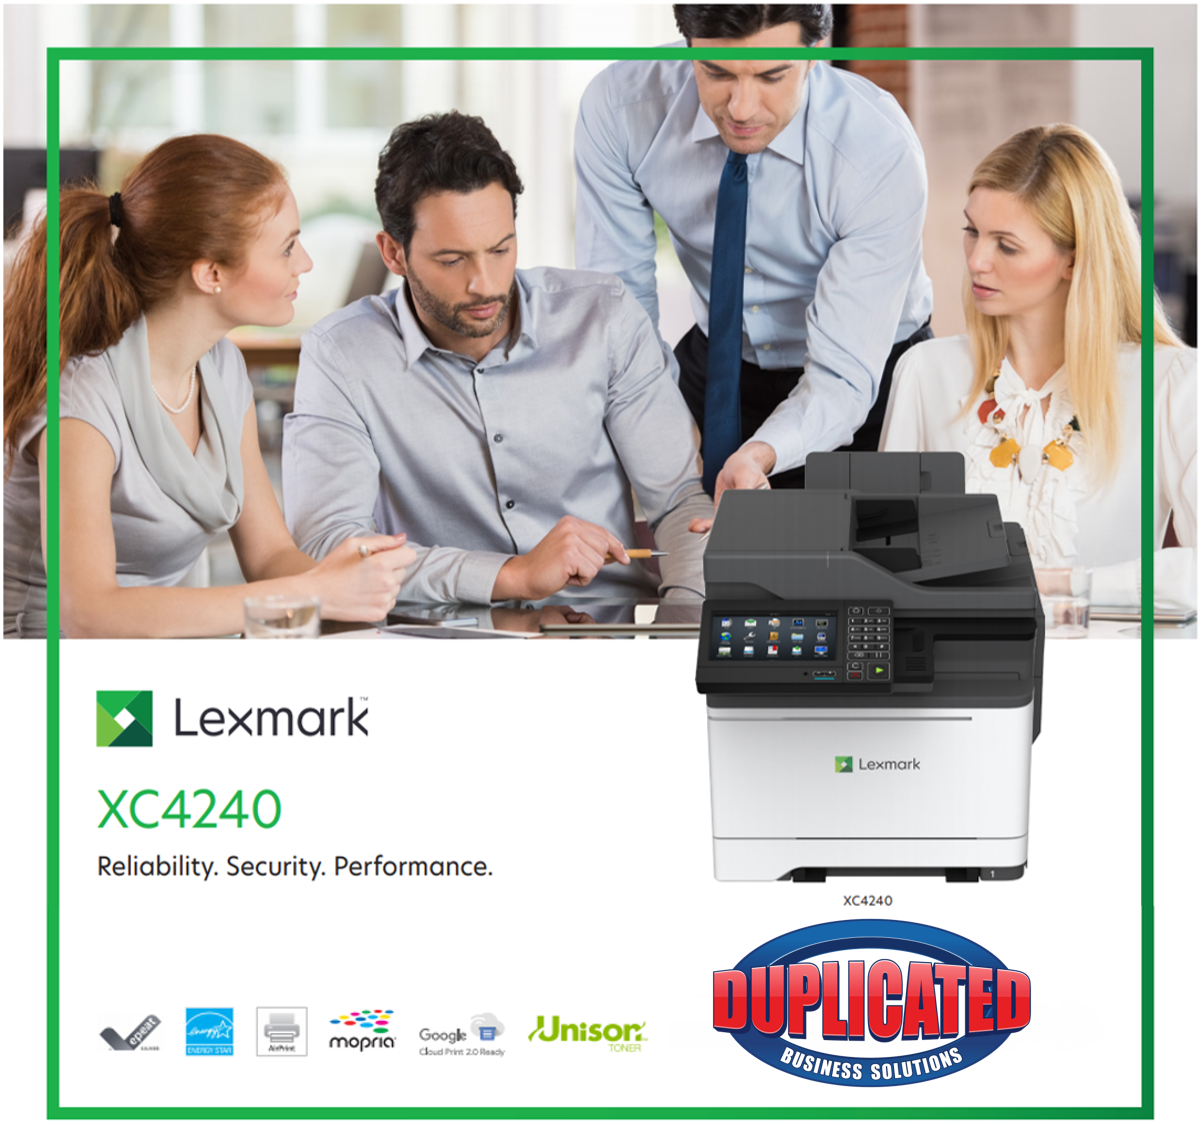 Lexmark XC4240 Brochure Top Picture Duplicated Business Solutions.png